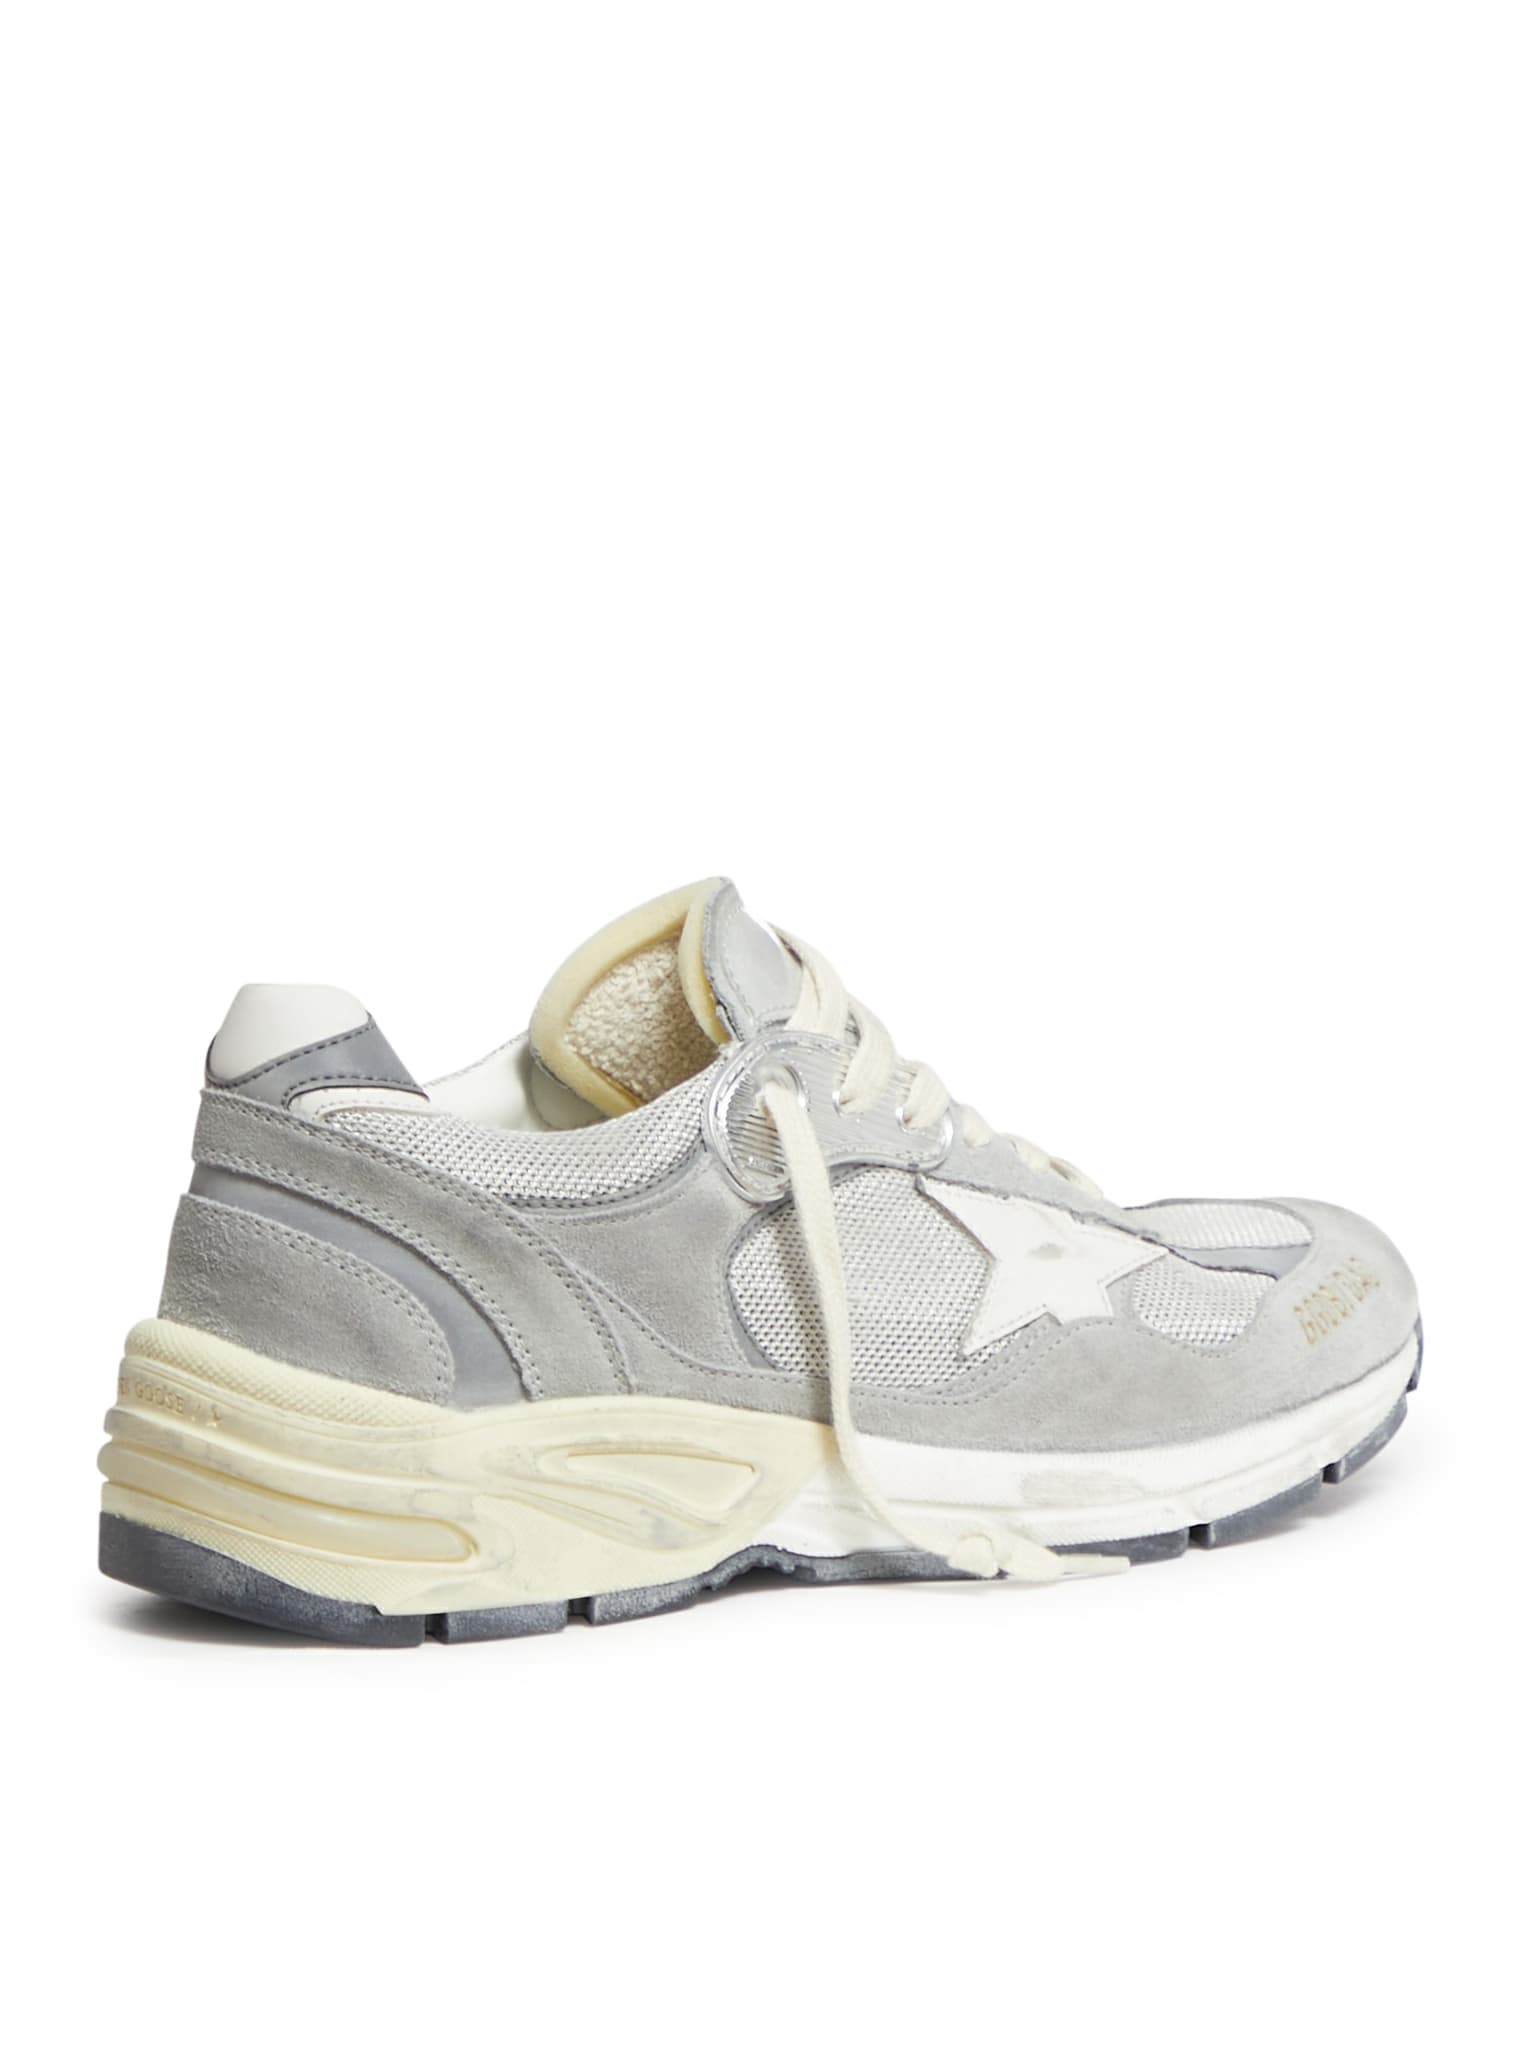 Shop Golden Goose Running Dad Net Upper Suede Toe And Spur Leather Star In Grey Silver White